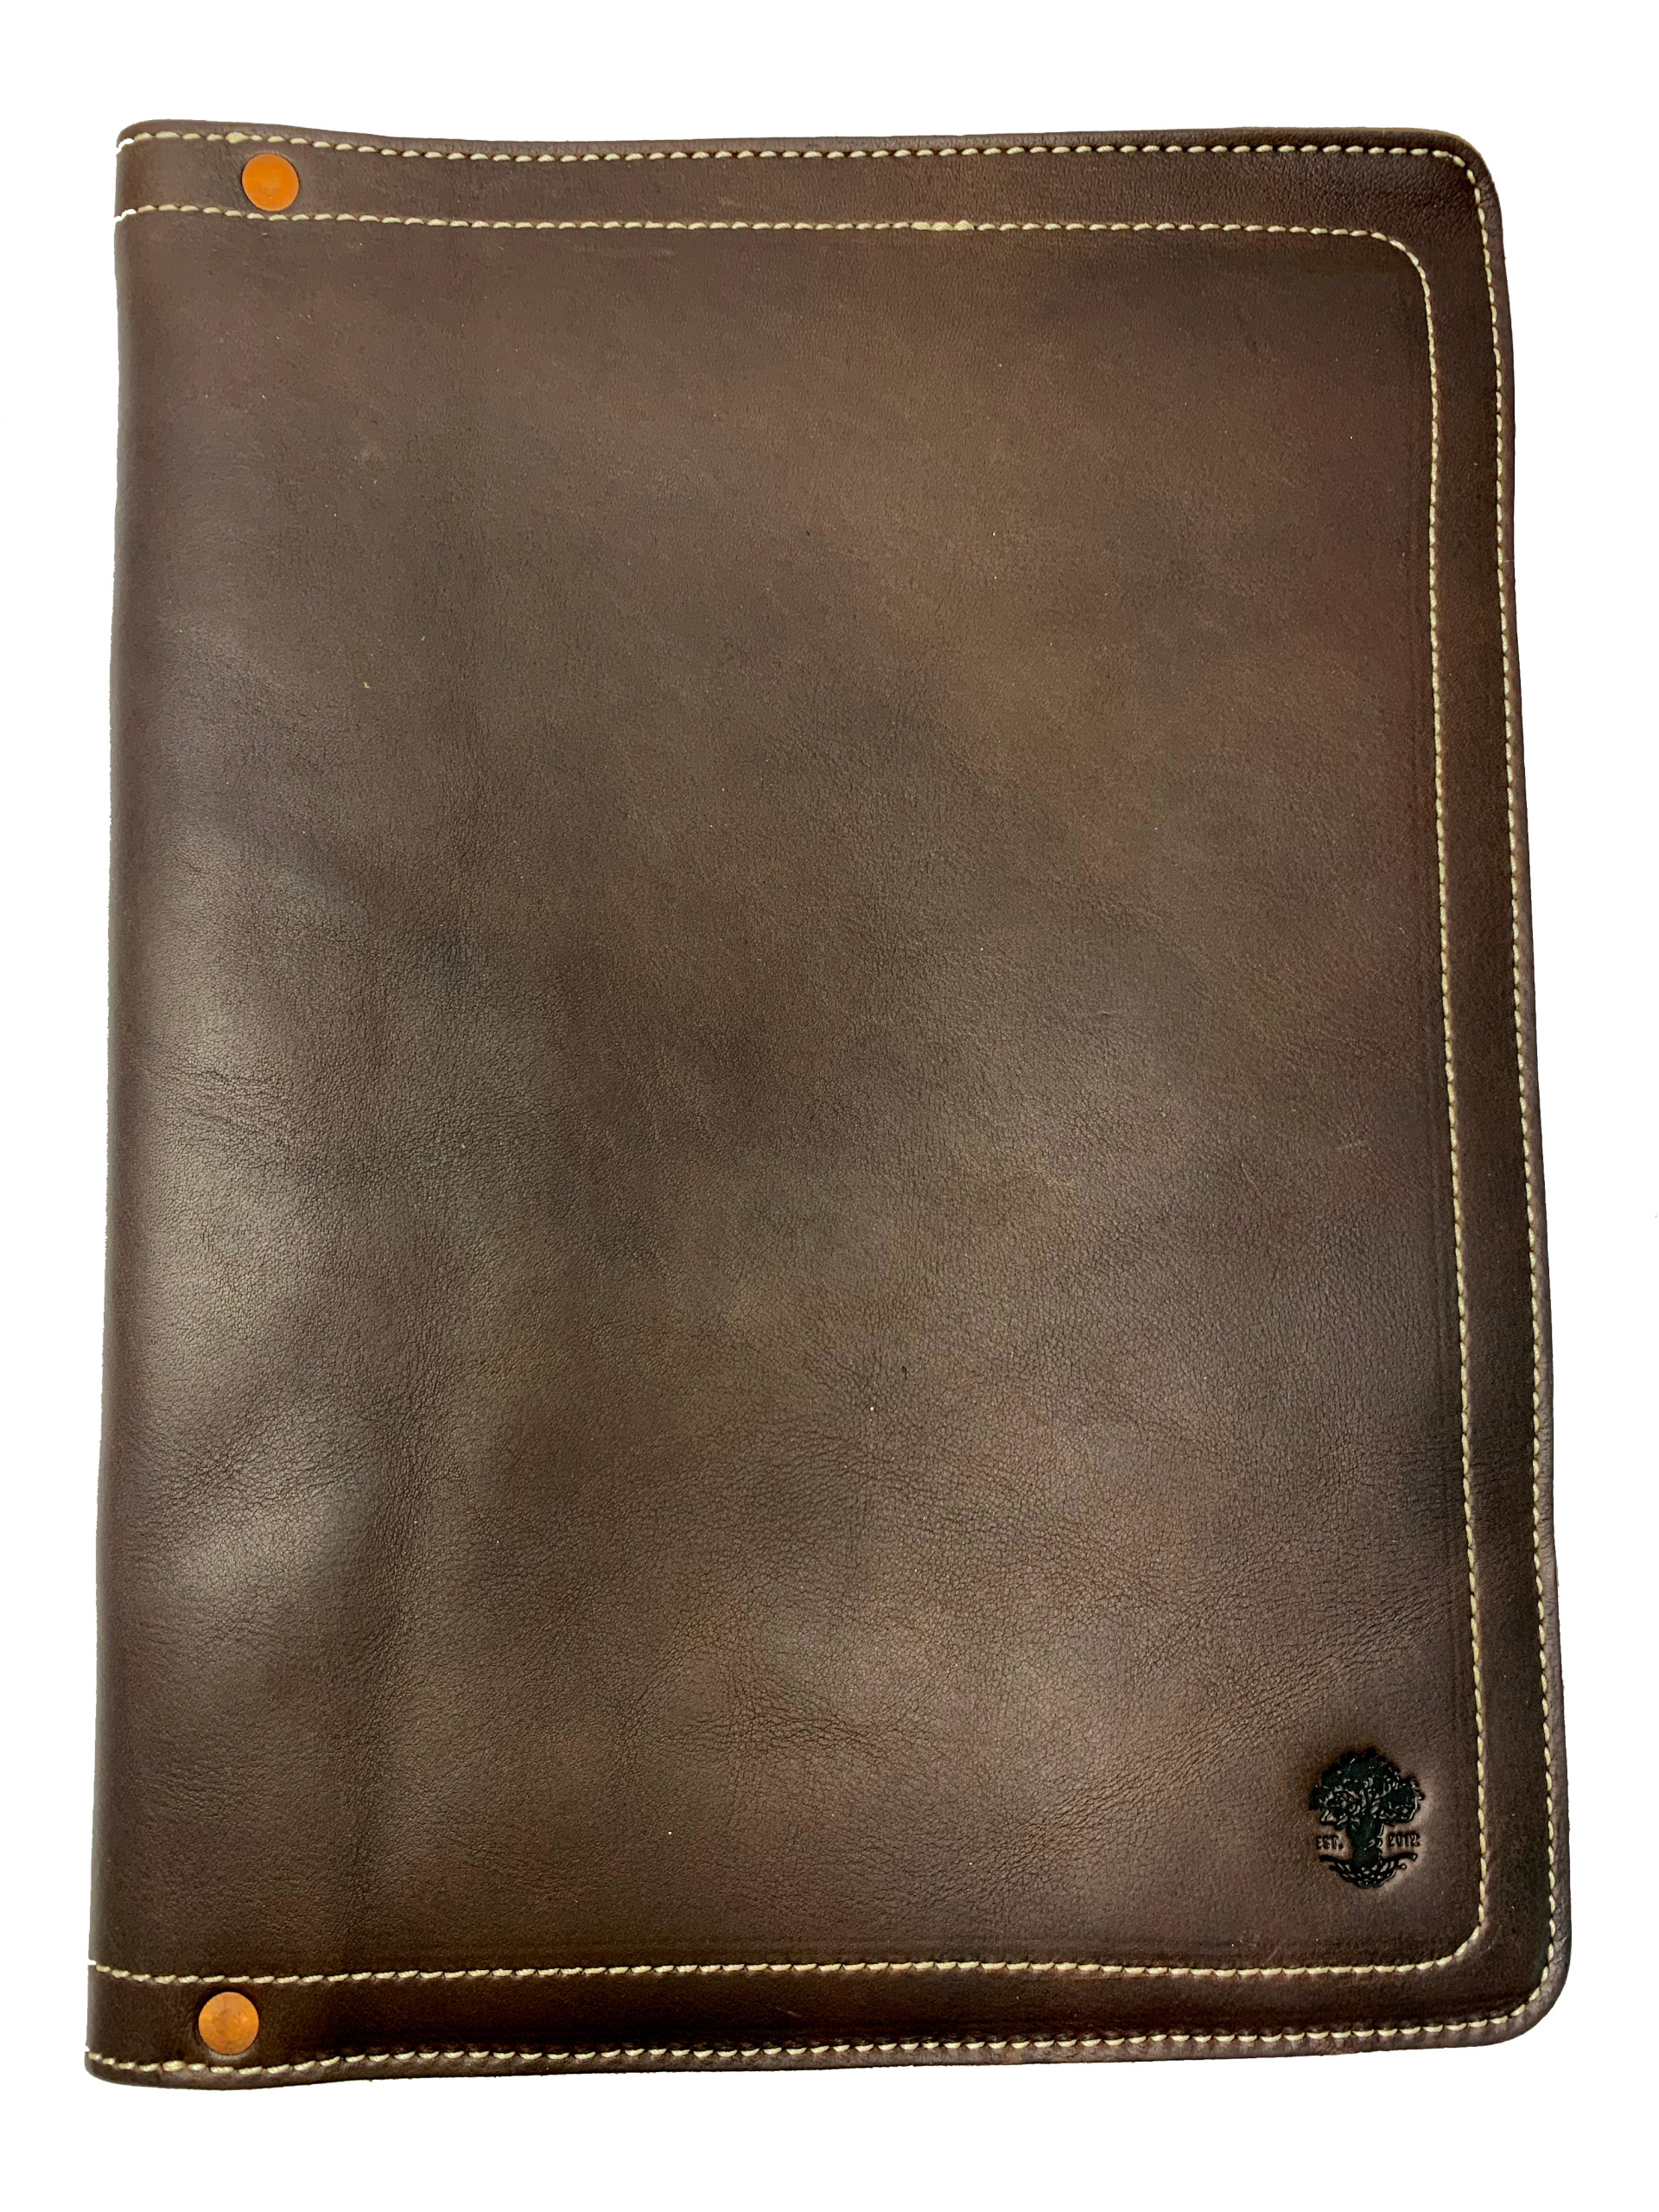 Small Leather Notepad Holder - Leather Legal Padfolio by the Oak River ...